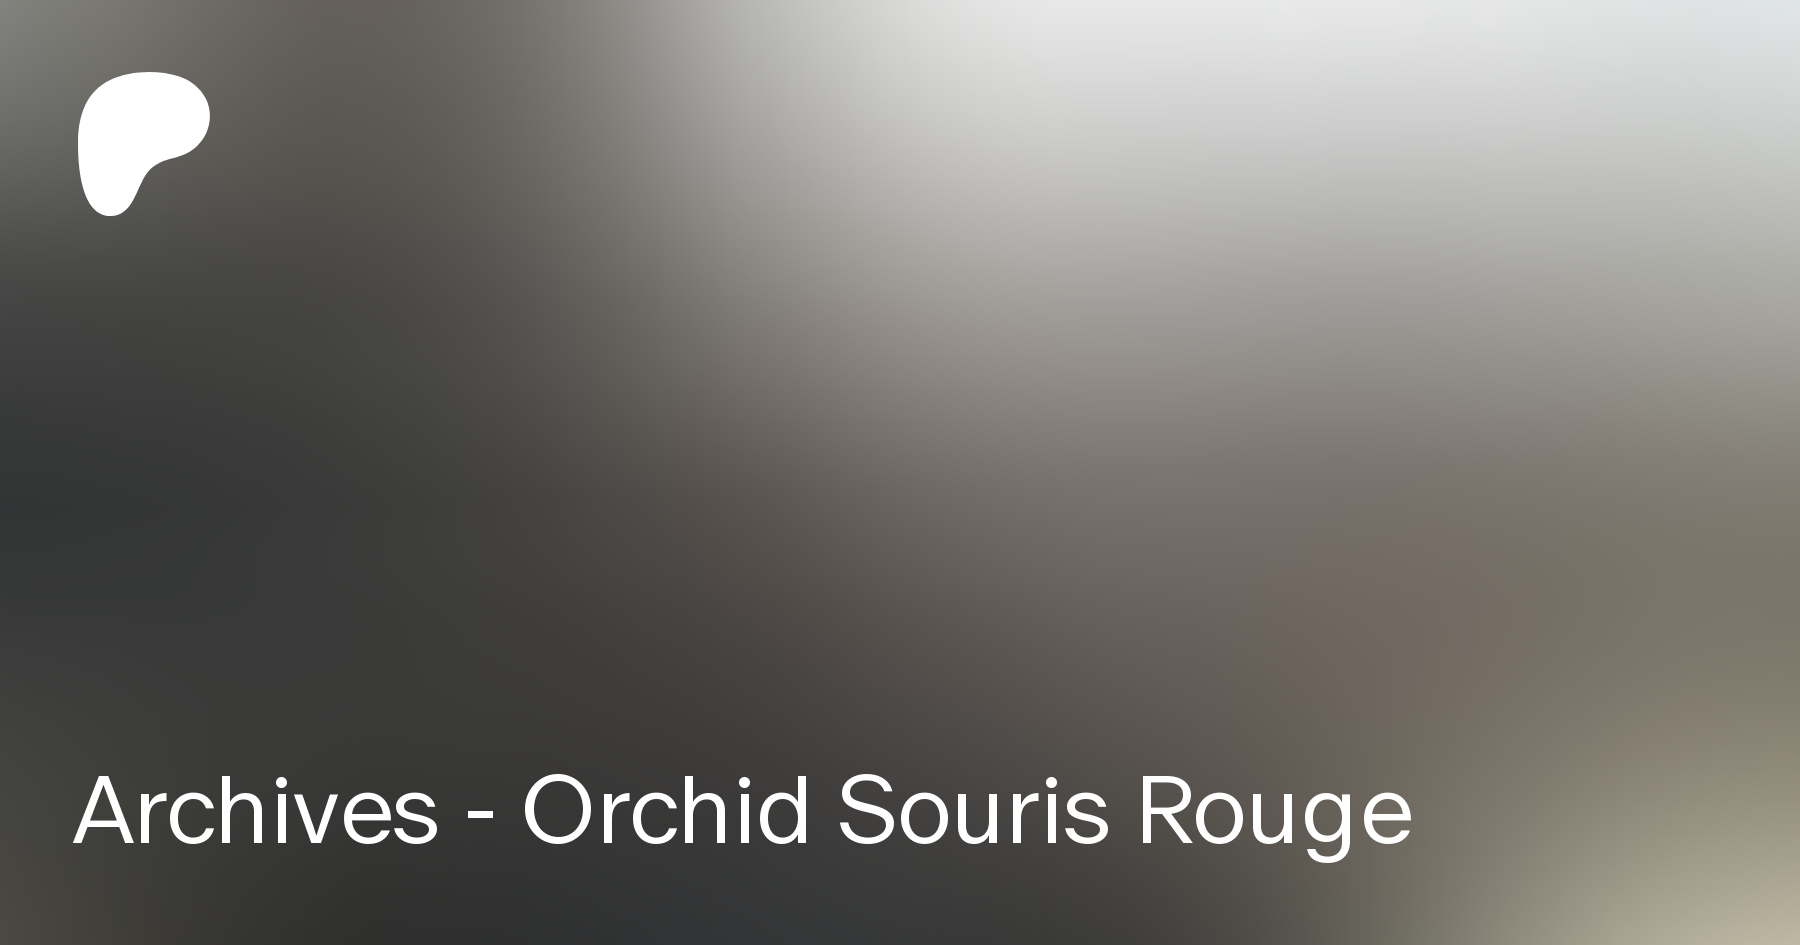 Rouge orchid souris Personal —